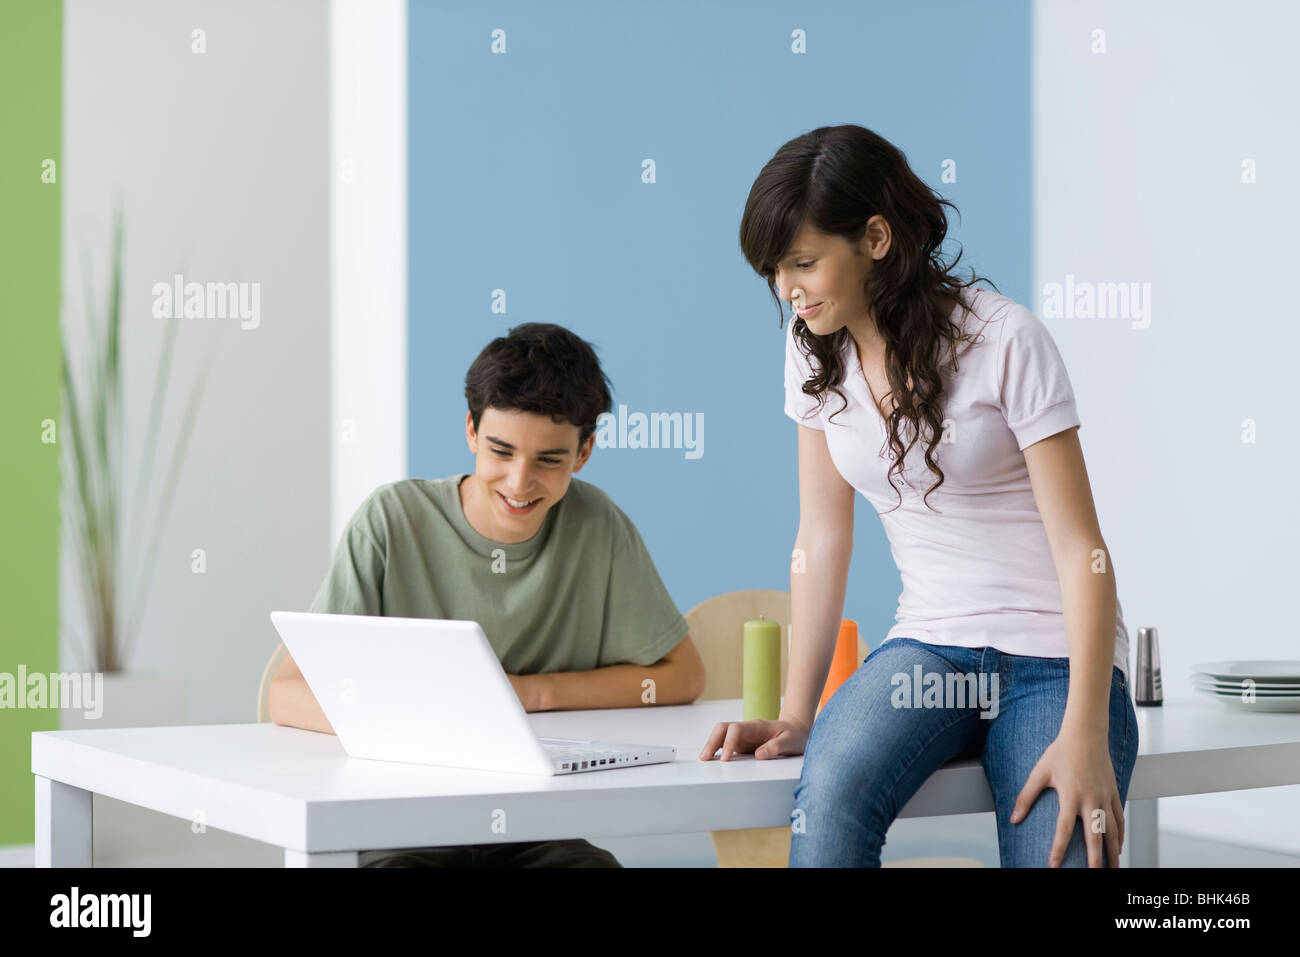 Teenagers hanging out using laptop computer together Stock Photo